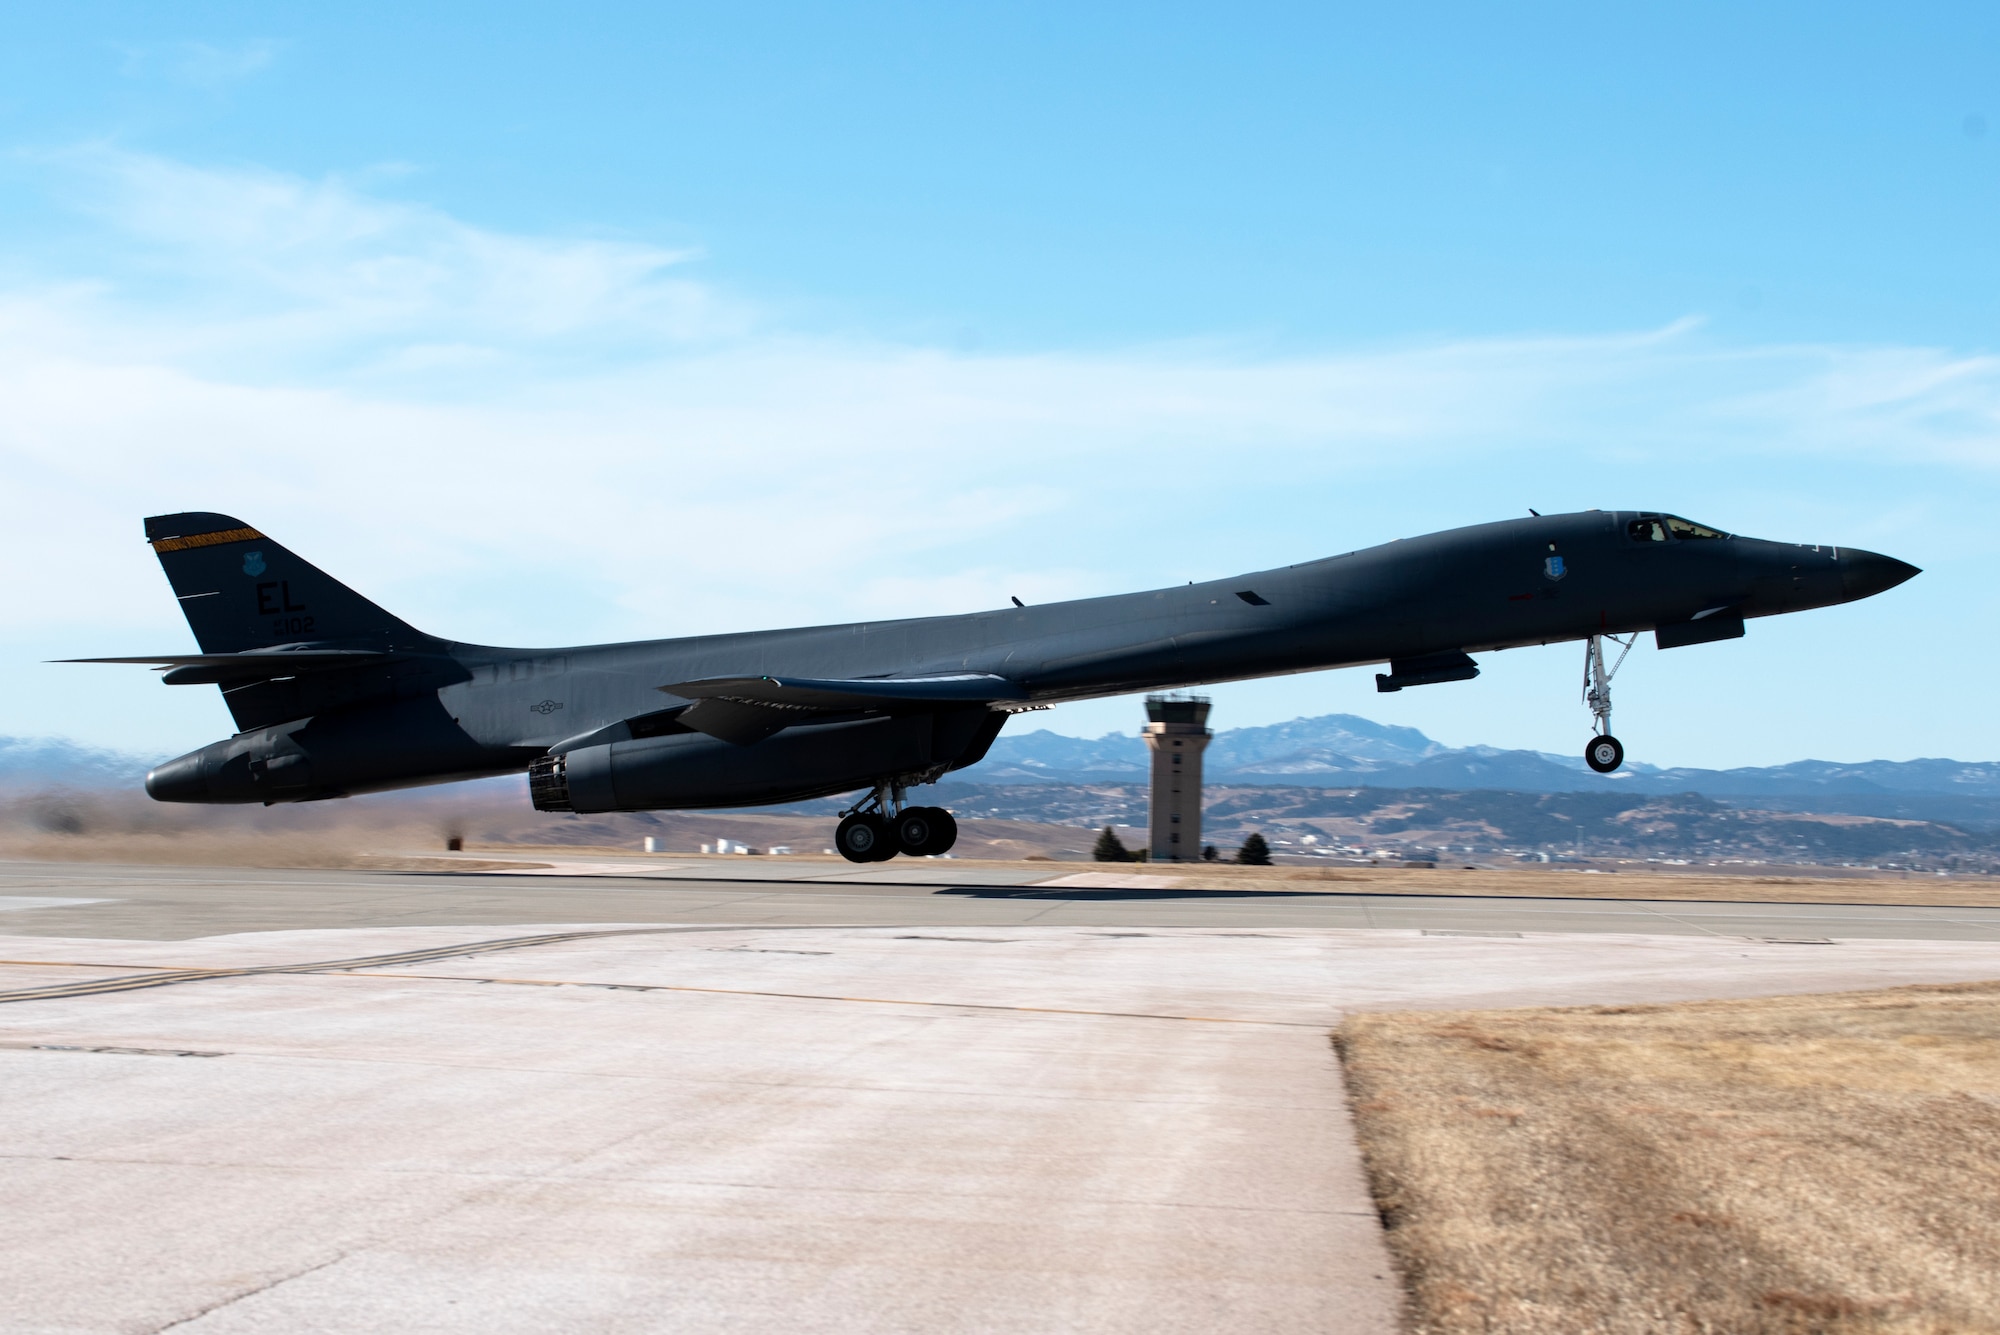 A B-1B Lancer assigned to the 37th Bomb Squadron takes off from Ellsworth Air Force Base, S.D., March 3, 2021. About 200 Ellsworth Airmen and several B-1 bombers are participating in Red Flag 21-2, at Nellis AFB, Nevada, March 8-19. This iteration of Red Flag will host 2,500 U.S. and international participants from a dozen states, Singapore, Sweden and seven NATO member nations.  (U.S. Air Force photo by Airman 1st Class Quentin Marx)